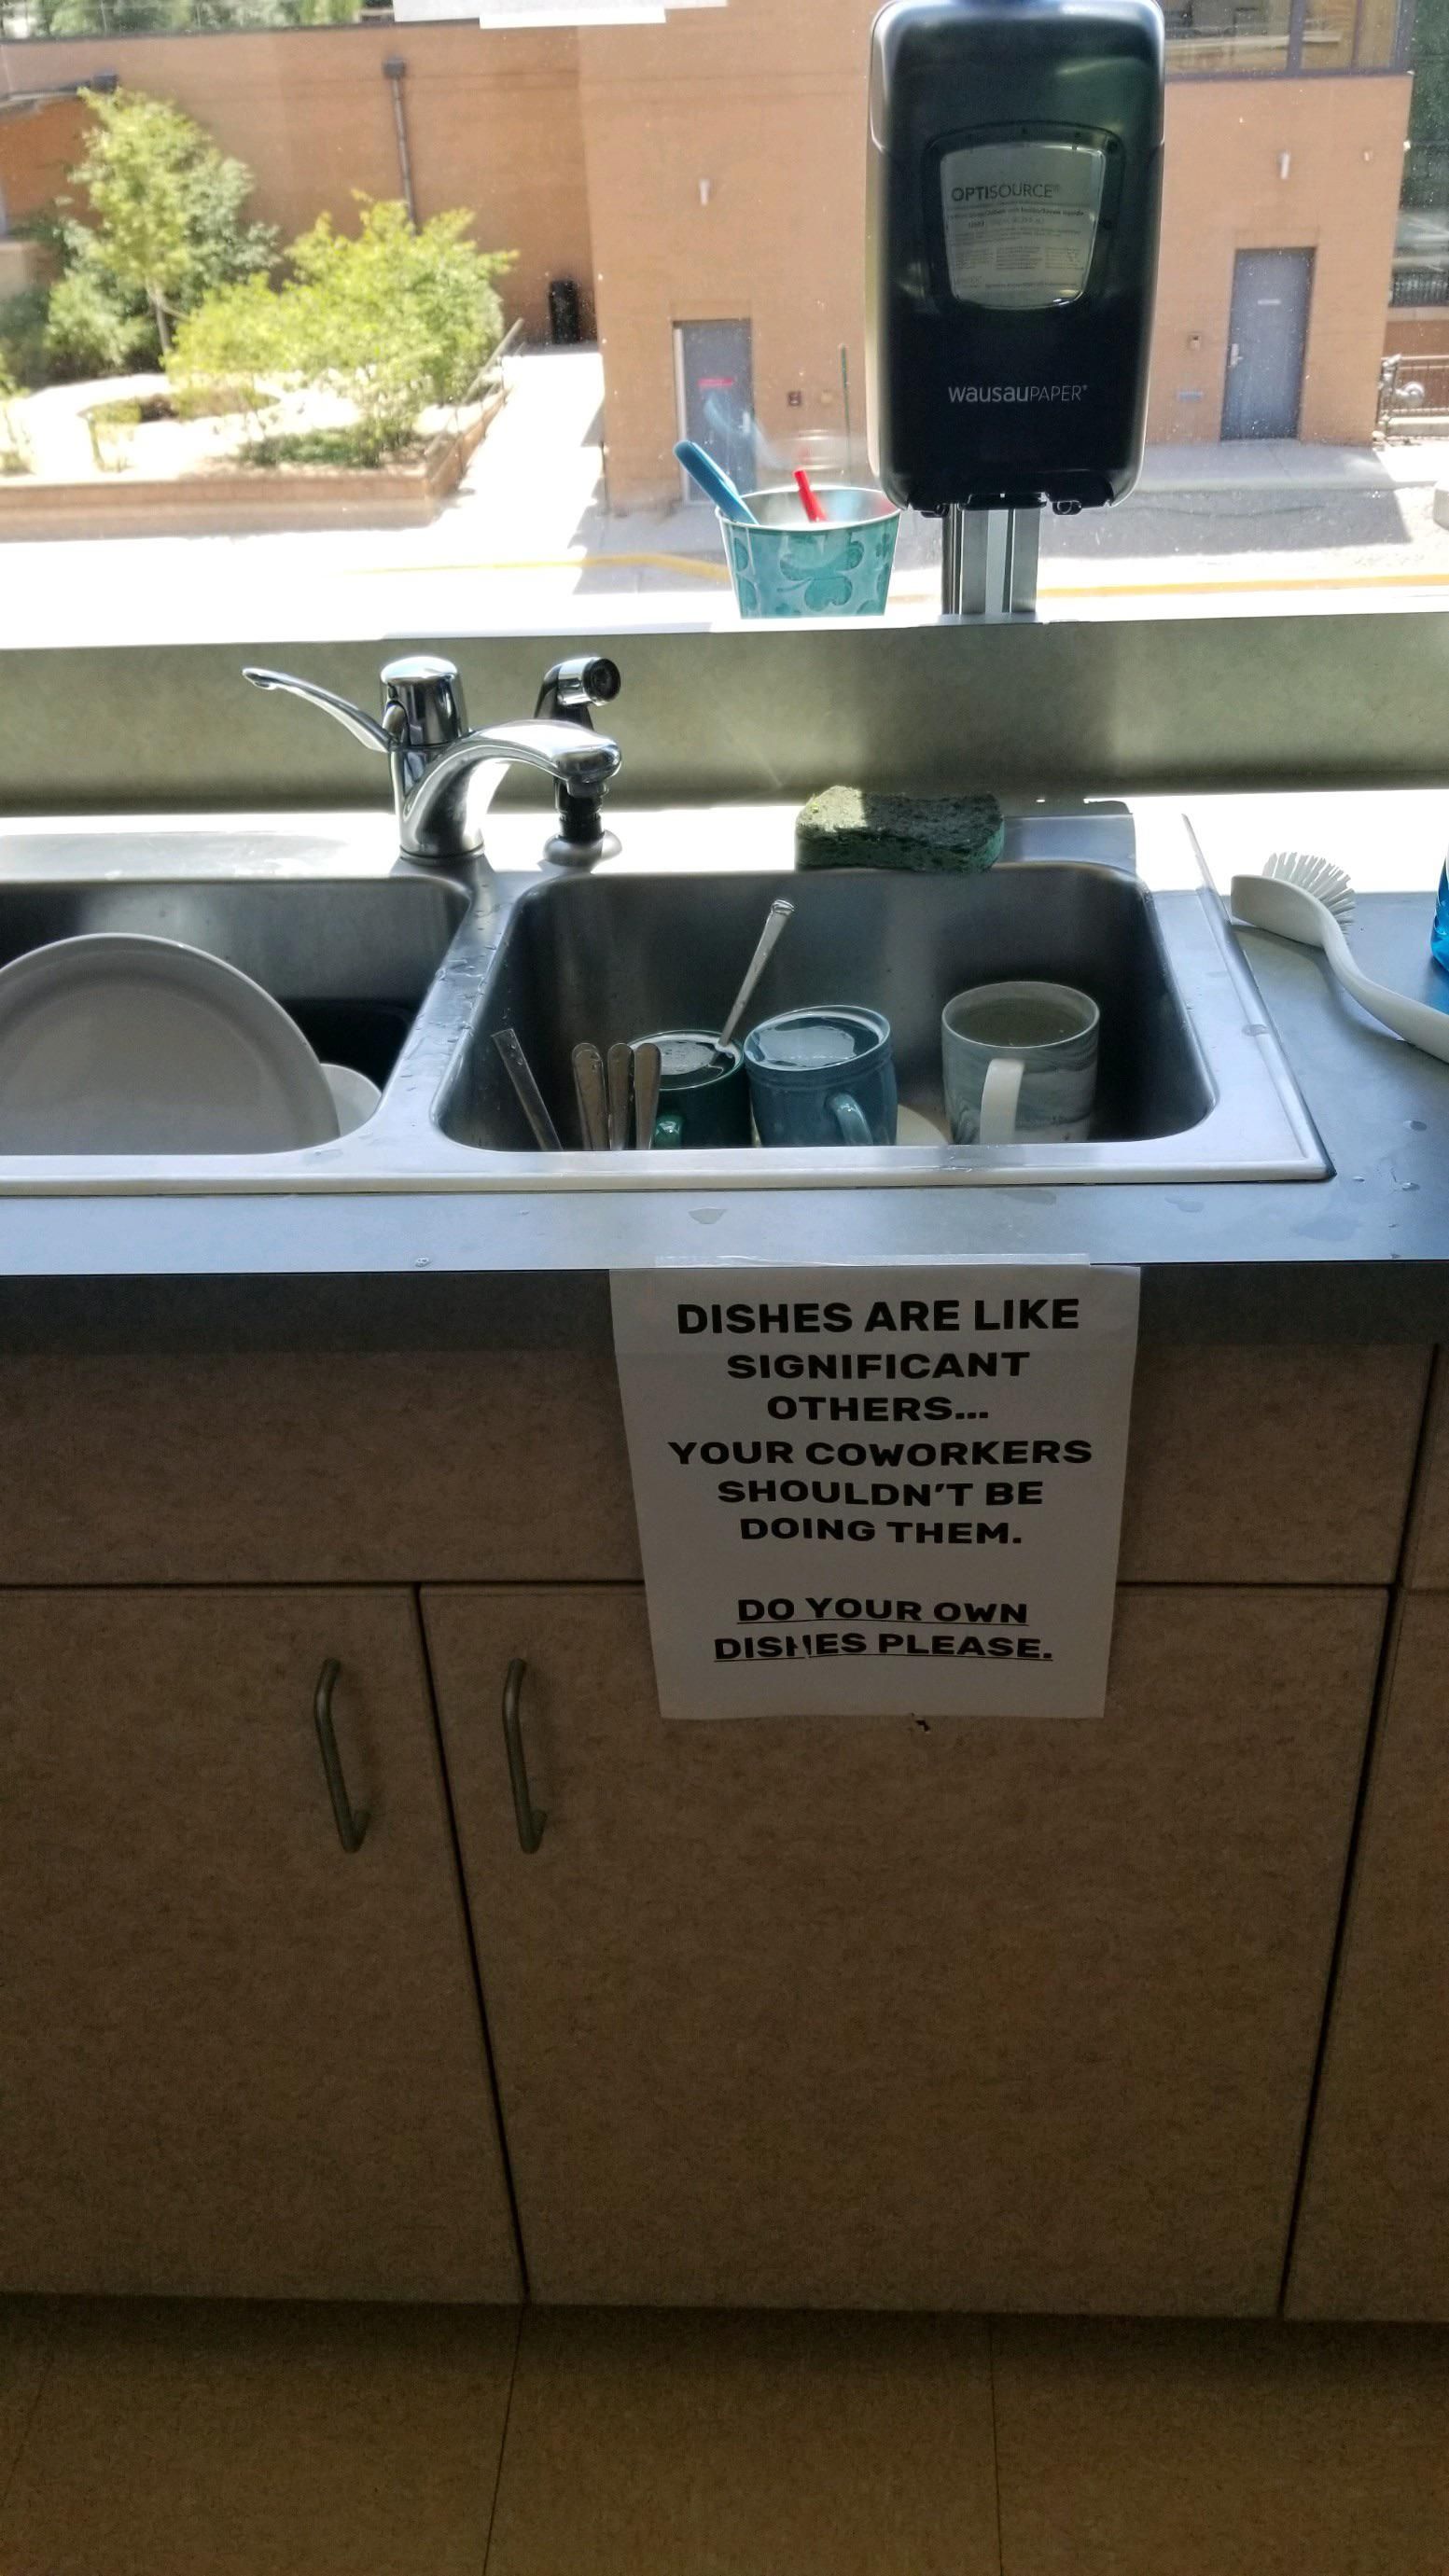 Sign in our break room at work today